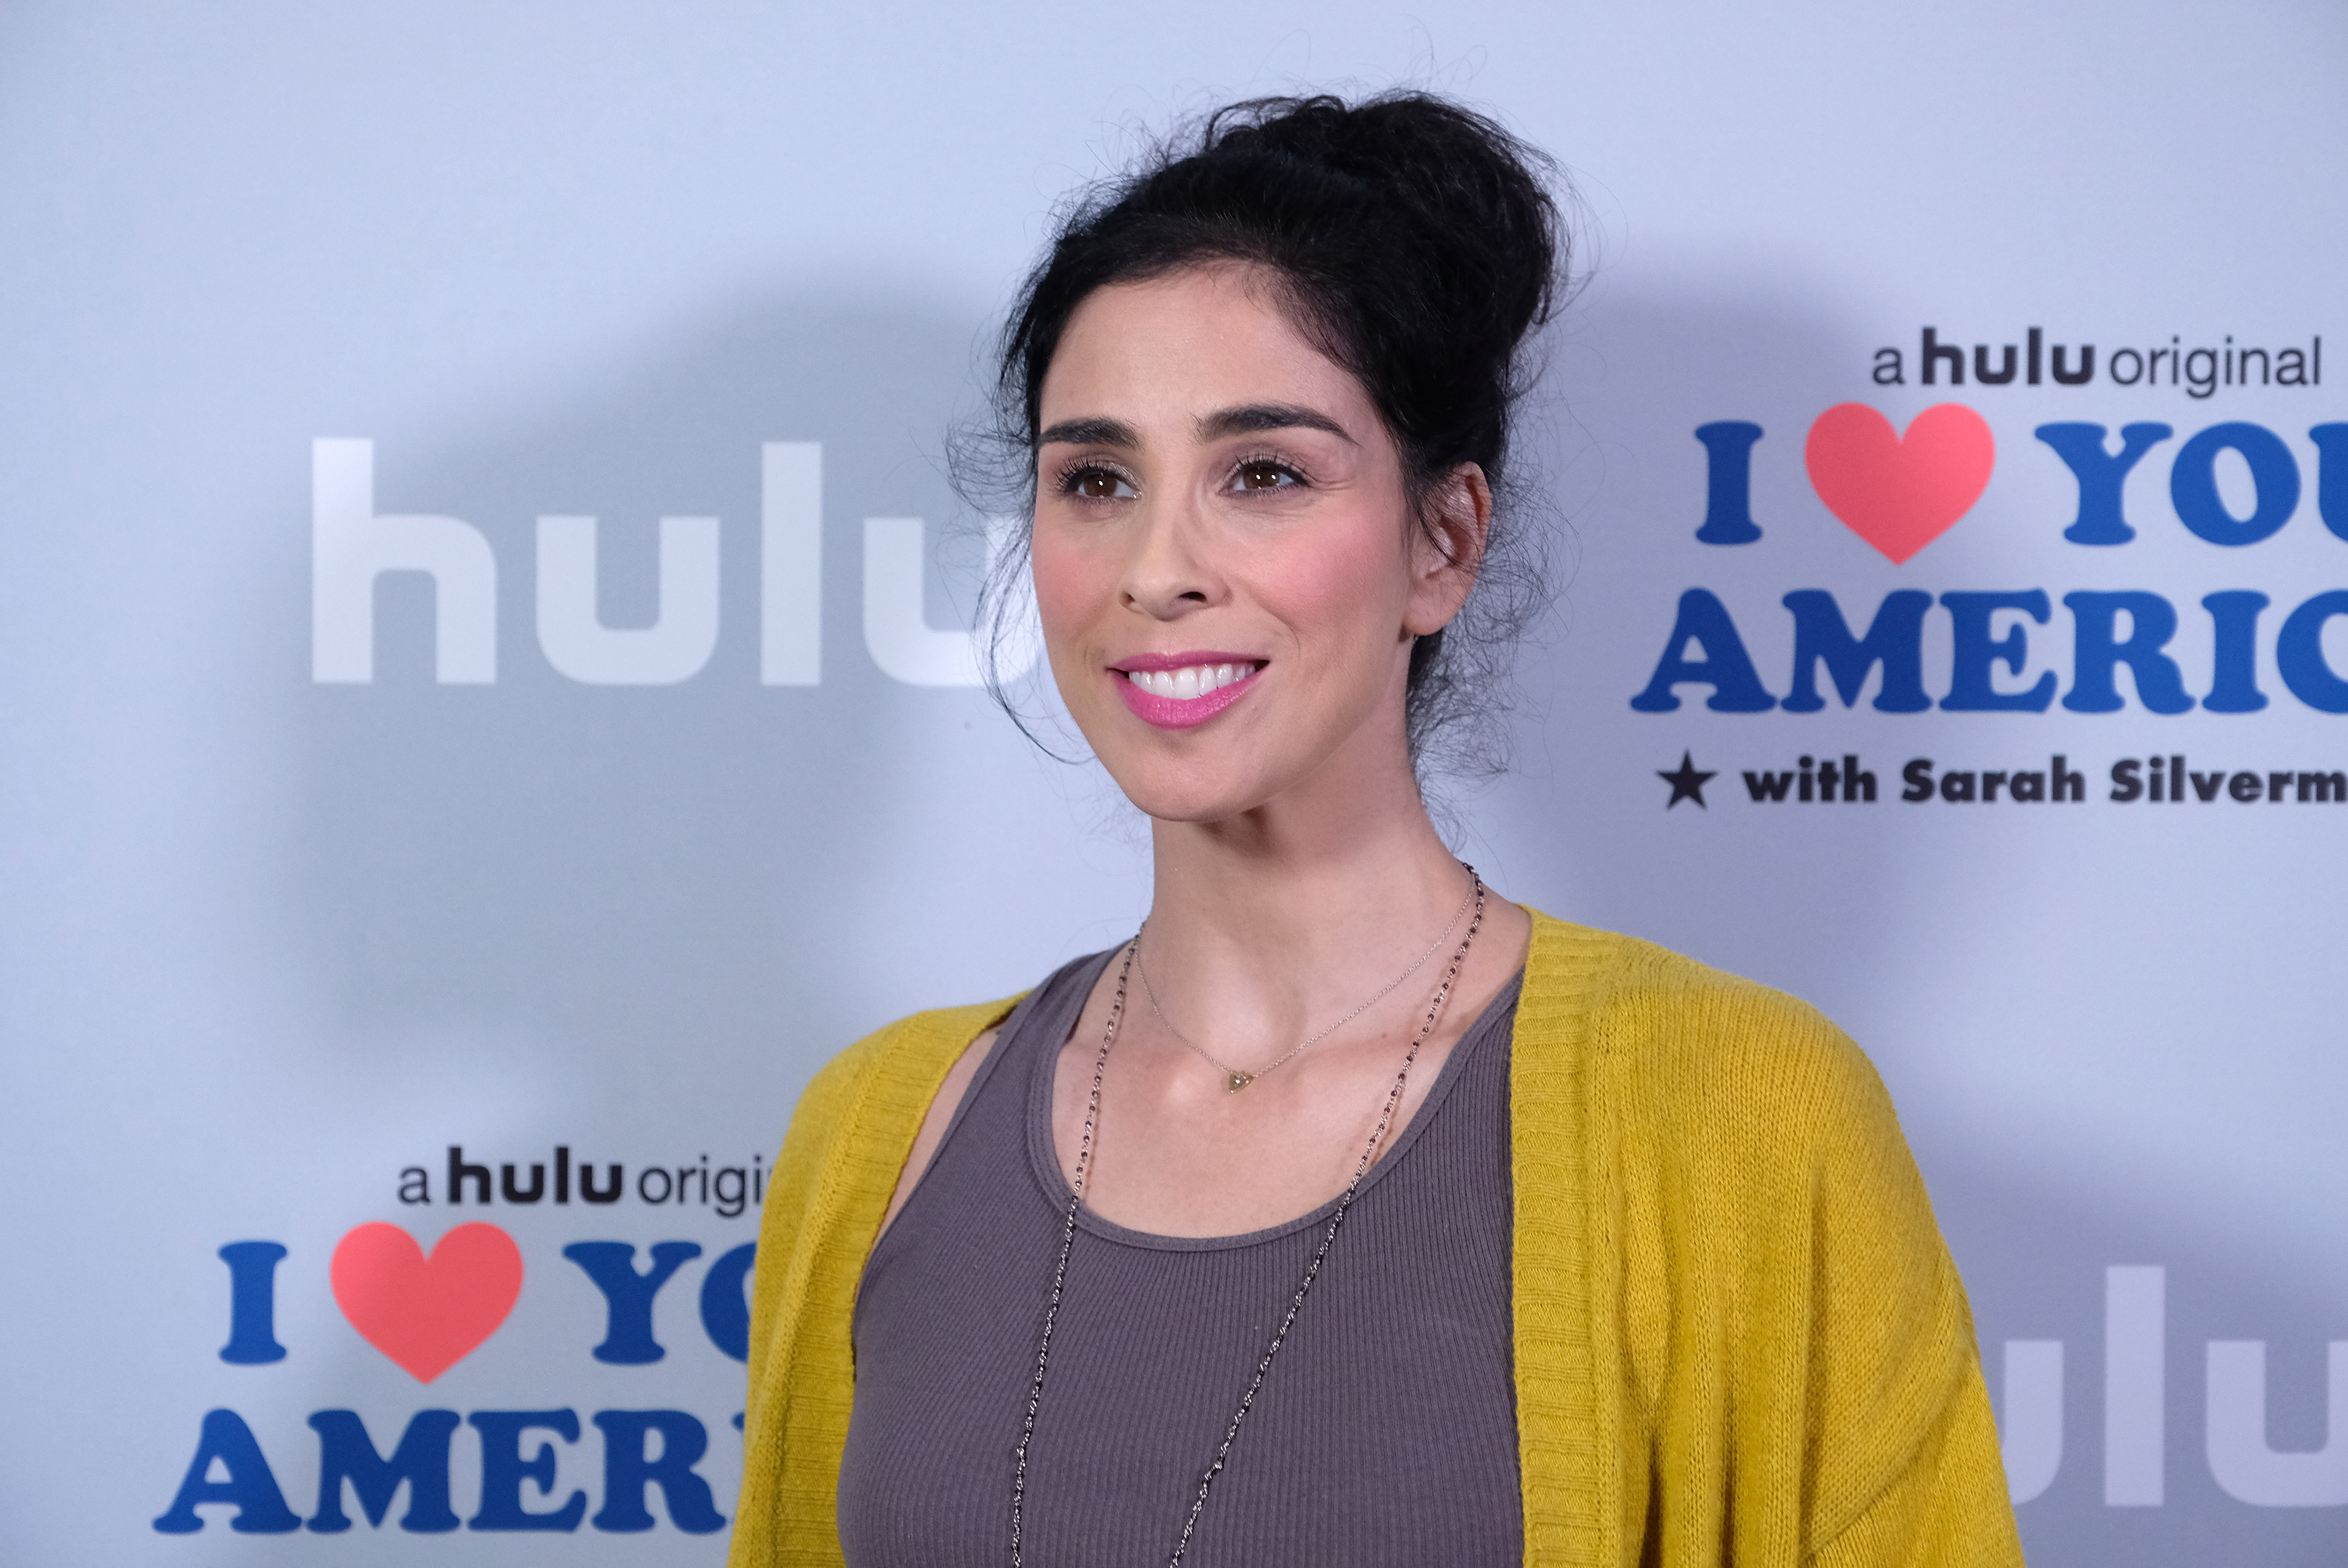 Photo Op For Hulu's "I Love You America" With Sarah Silverman